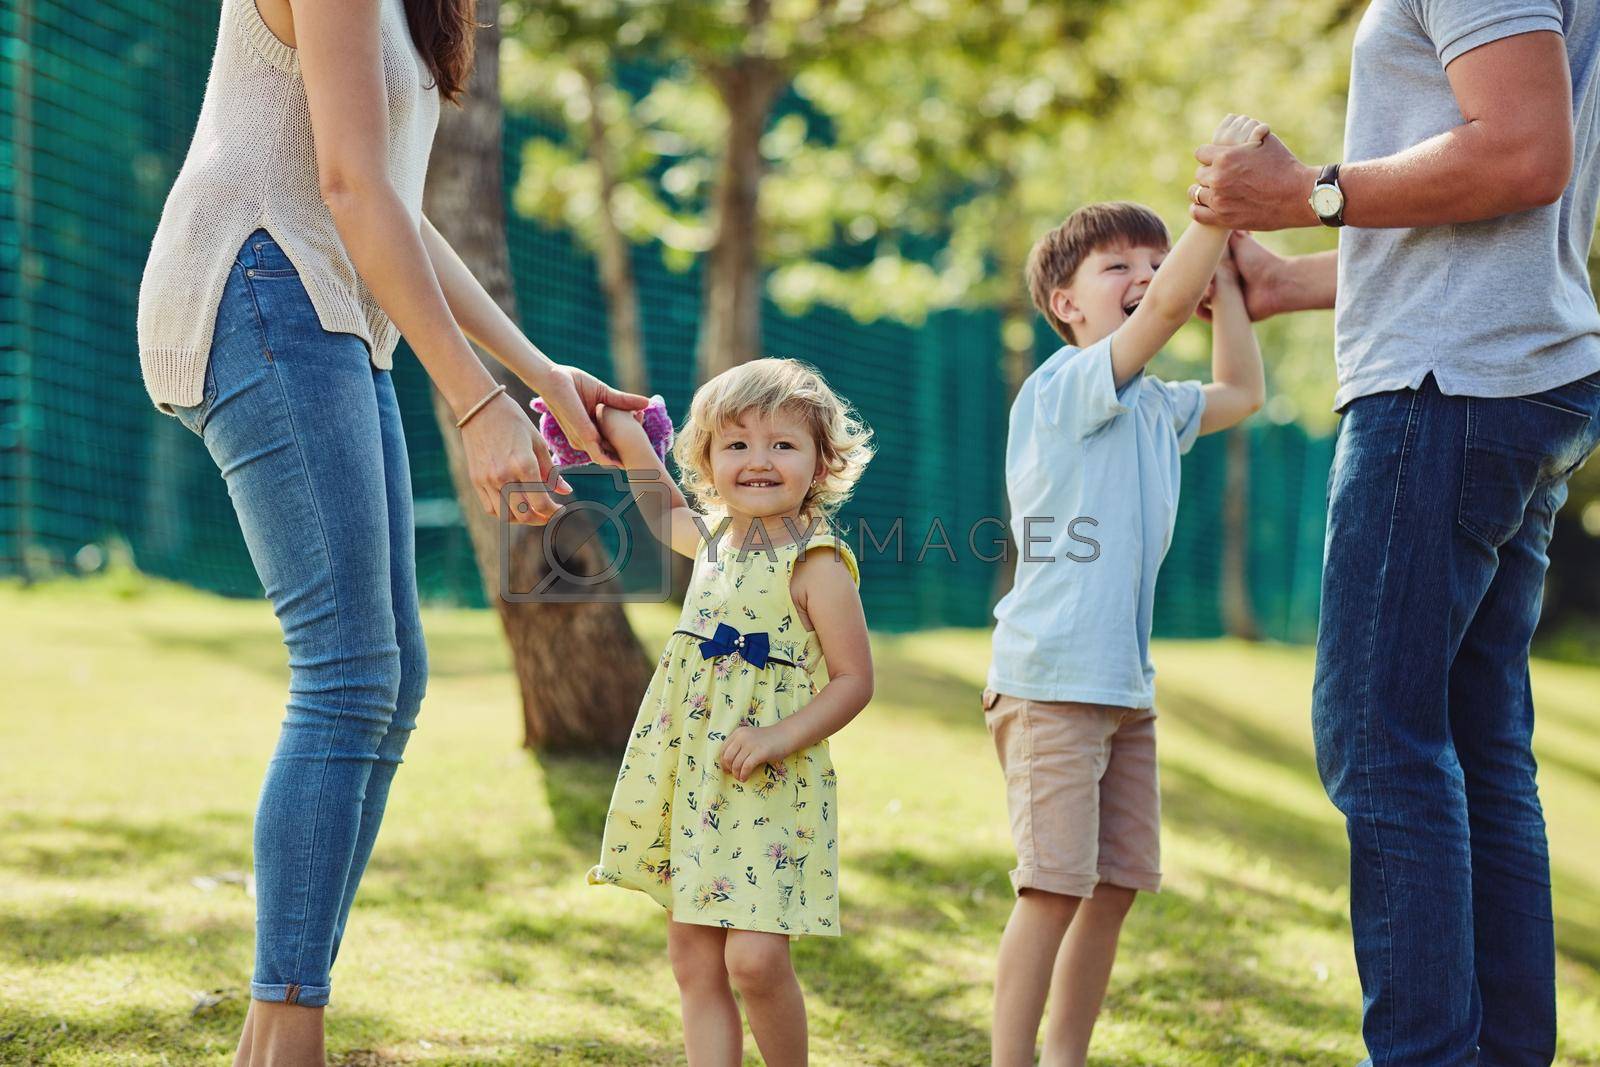 Shot of a happy family bonding together outdoors.